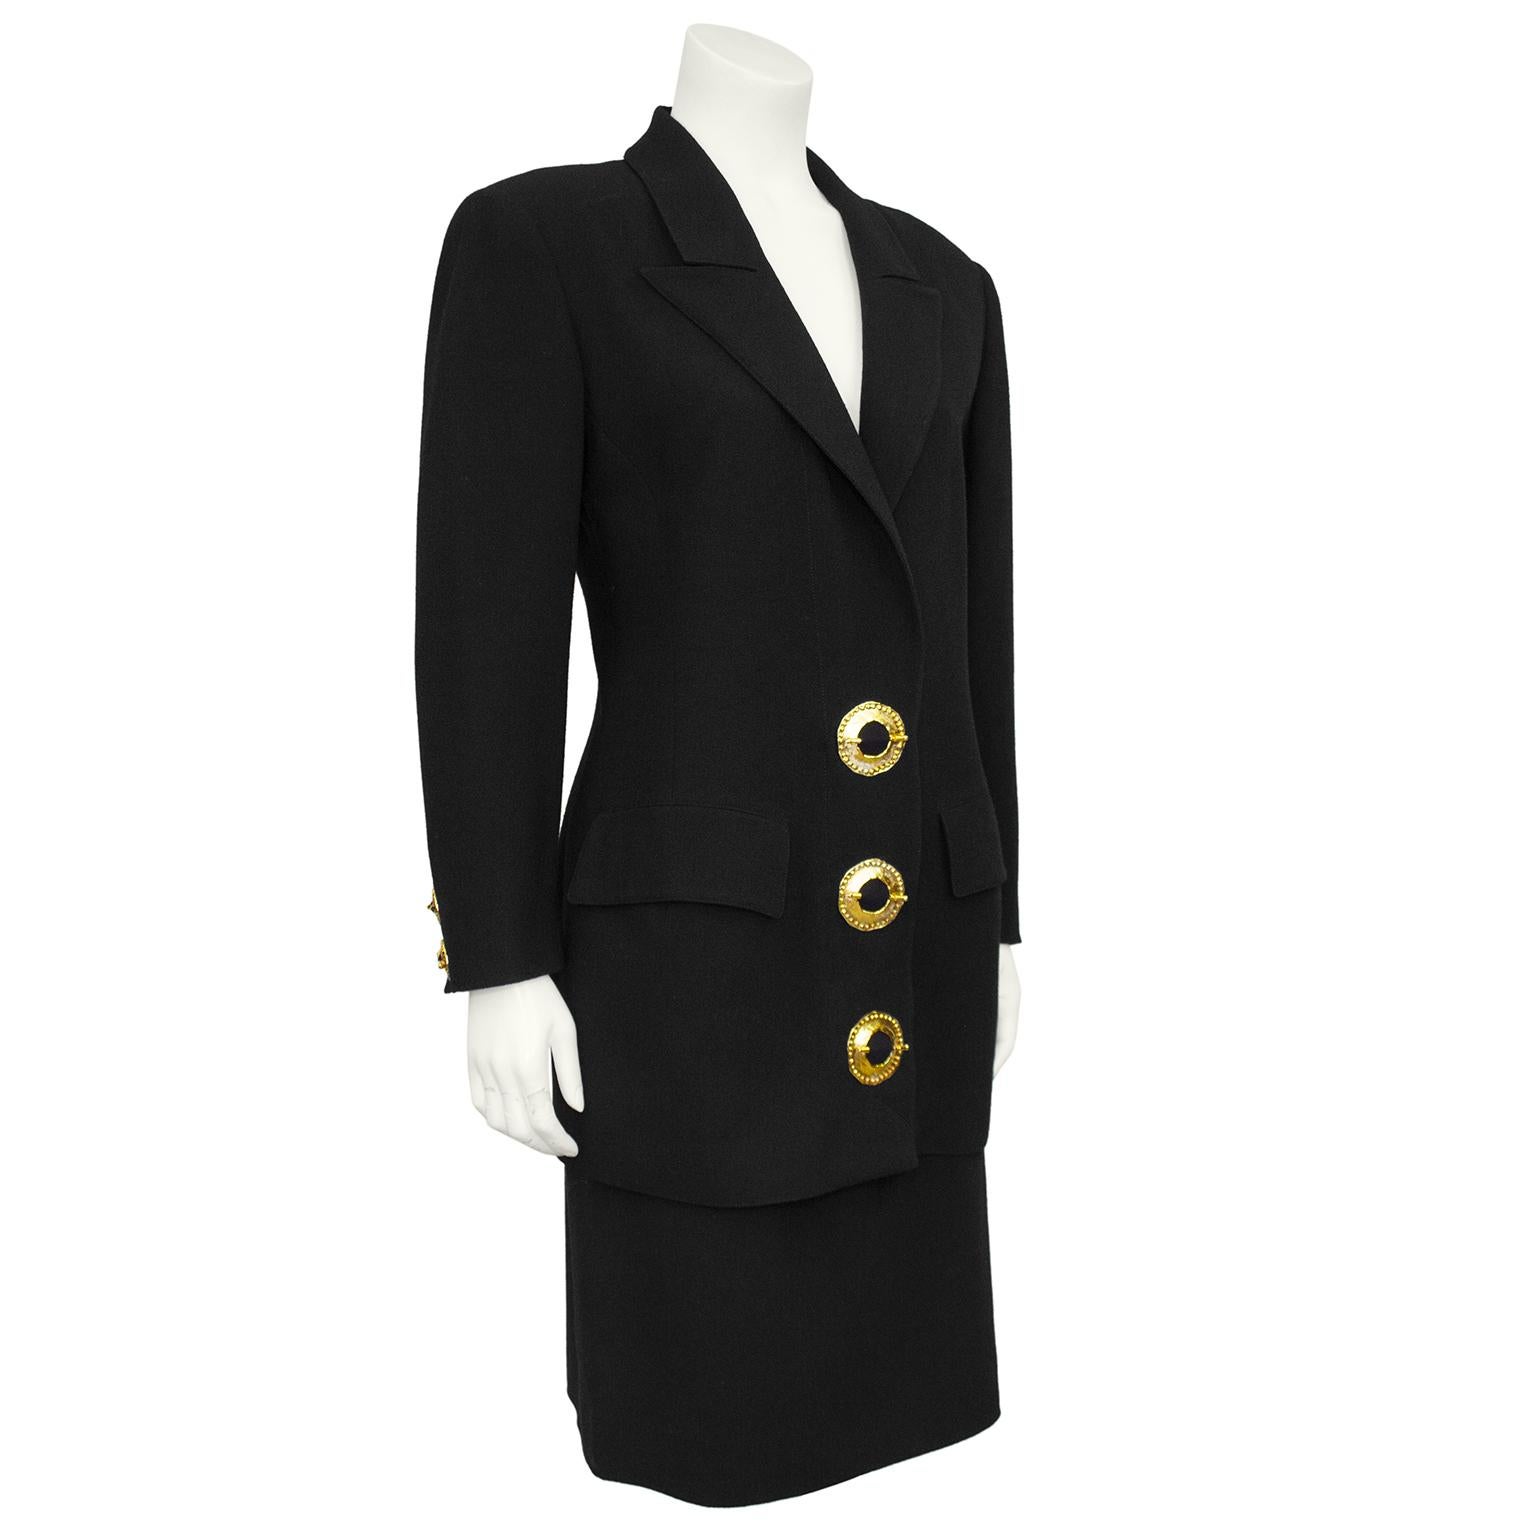 Valentino black wool skirt suit from the 1980s. Elongated blazer features large shoulder pads, notched collar and horizontal flap pockets. The black is contrasted with gold tone metal large circular buttons that look like brooches with pins through